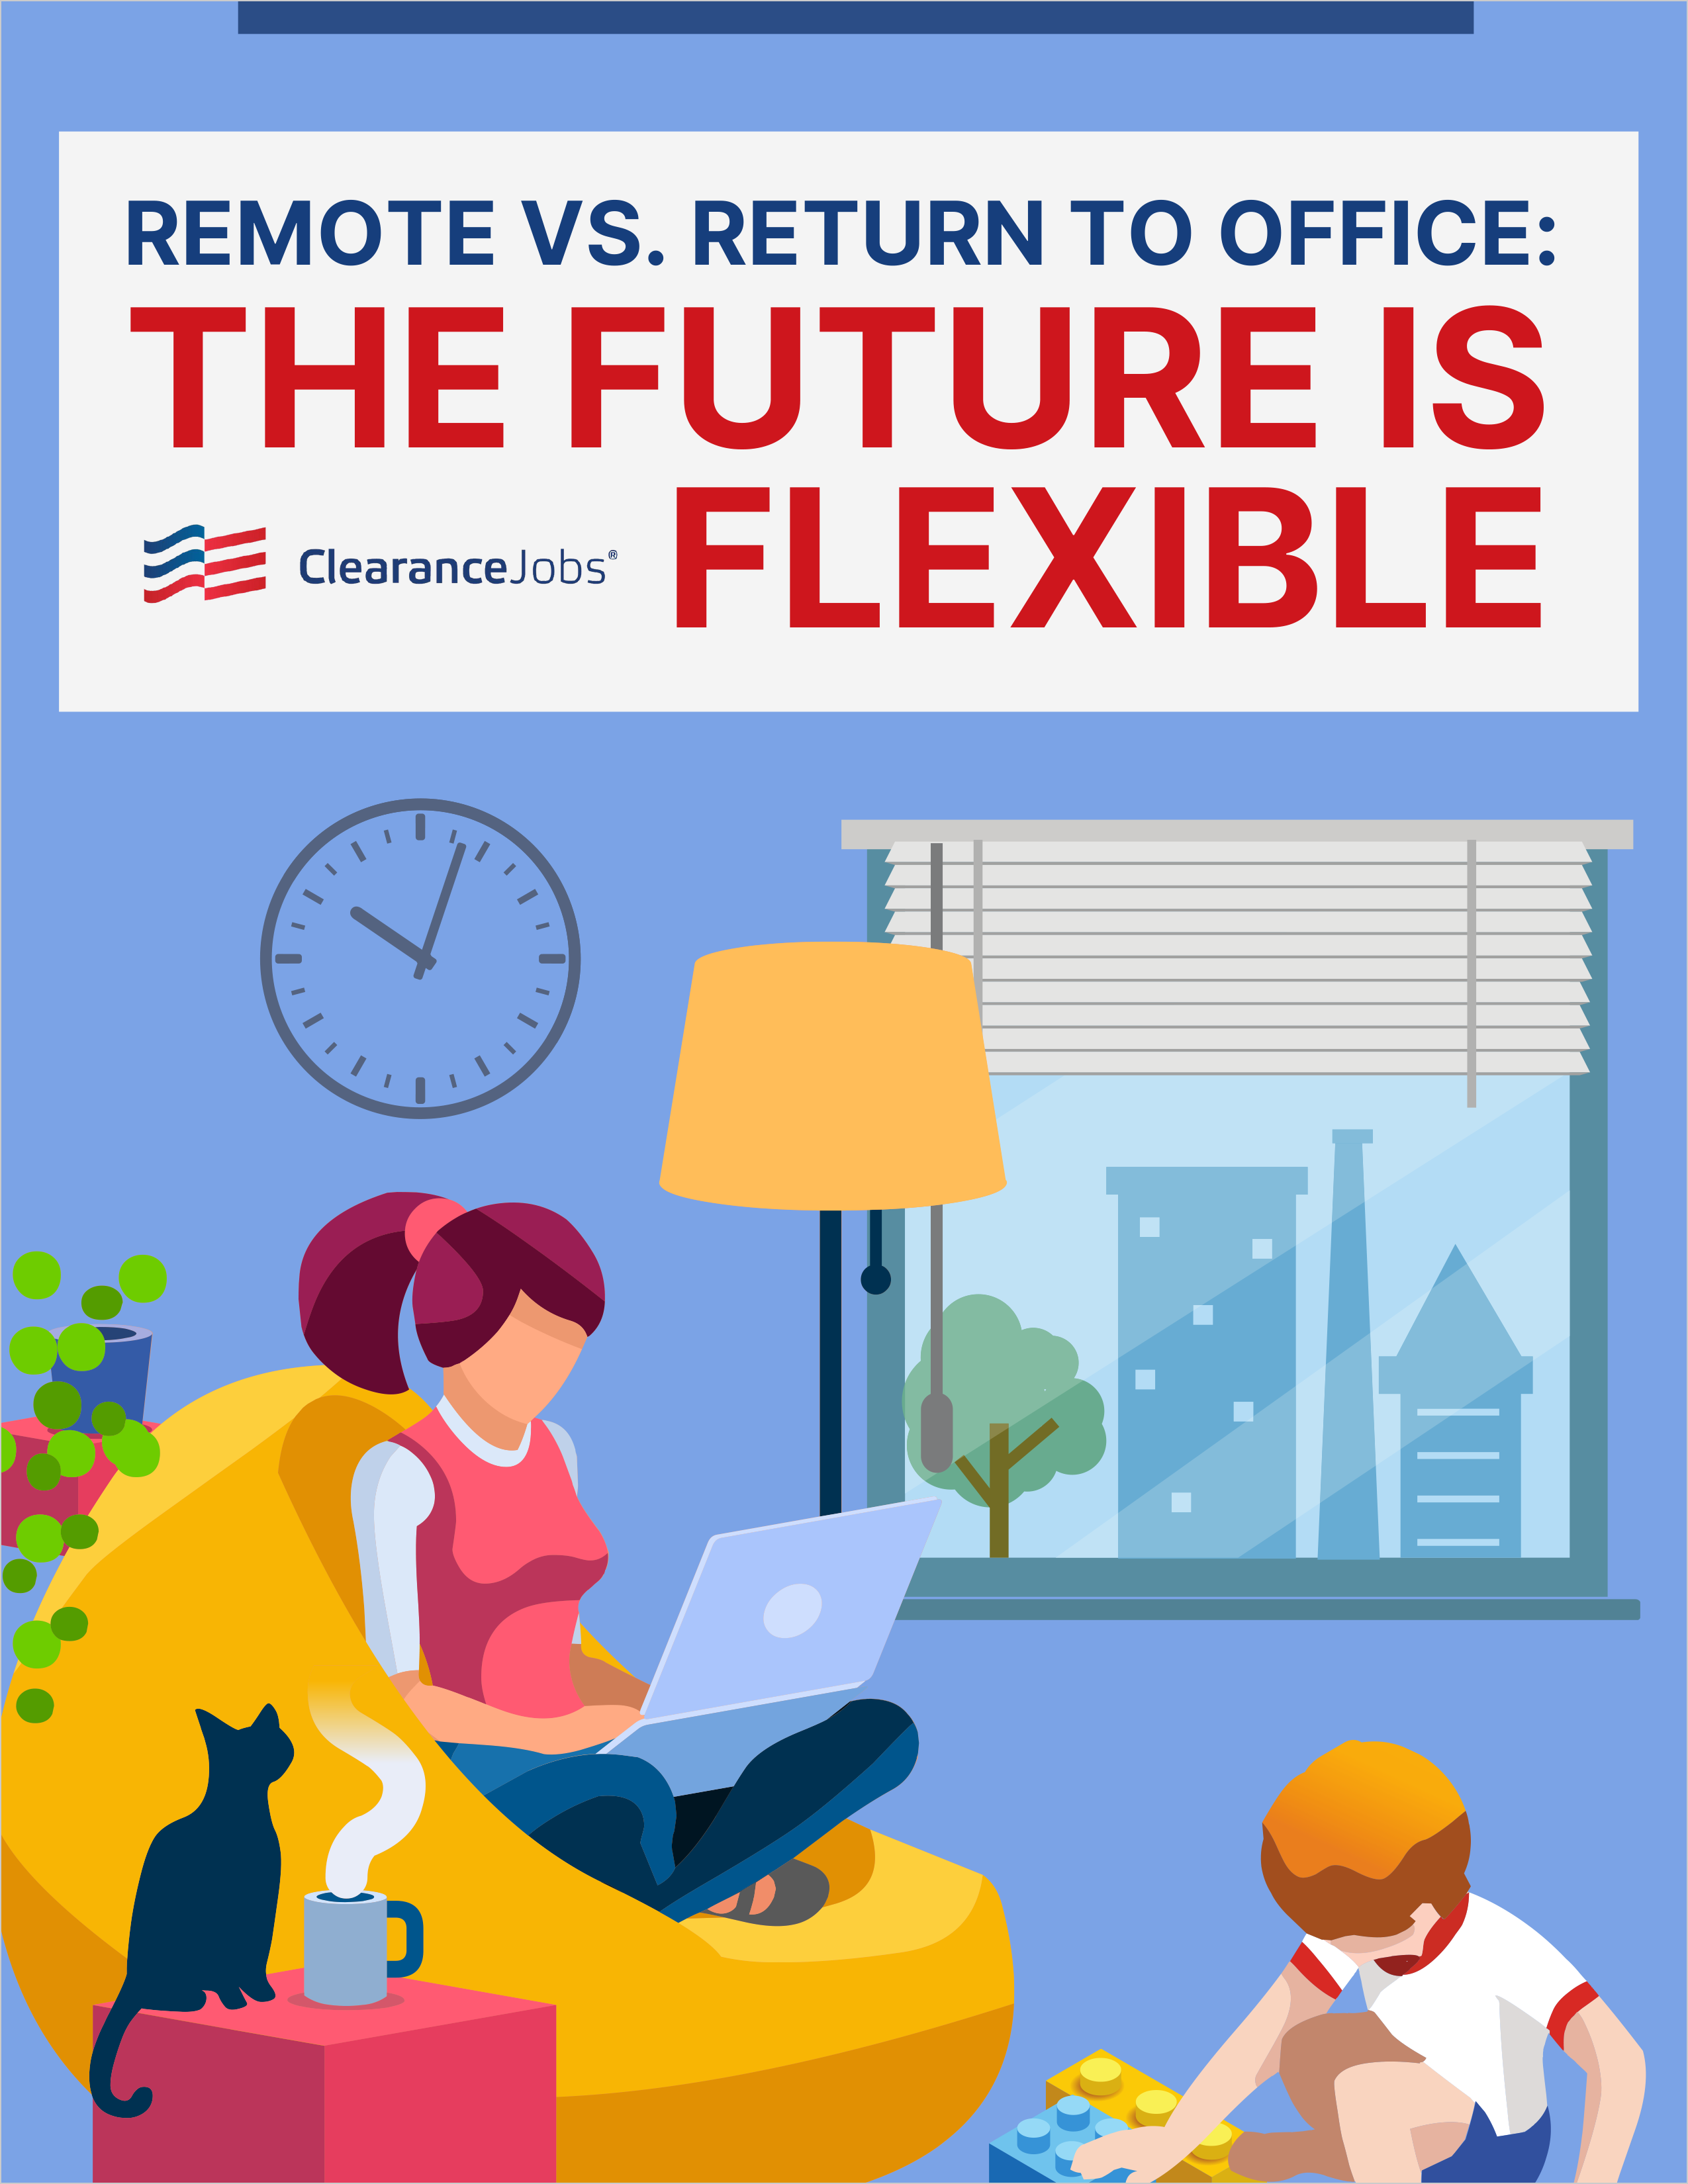 THE_FUTURE_IS_FLEXIBLE_FINAL_(1)-1